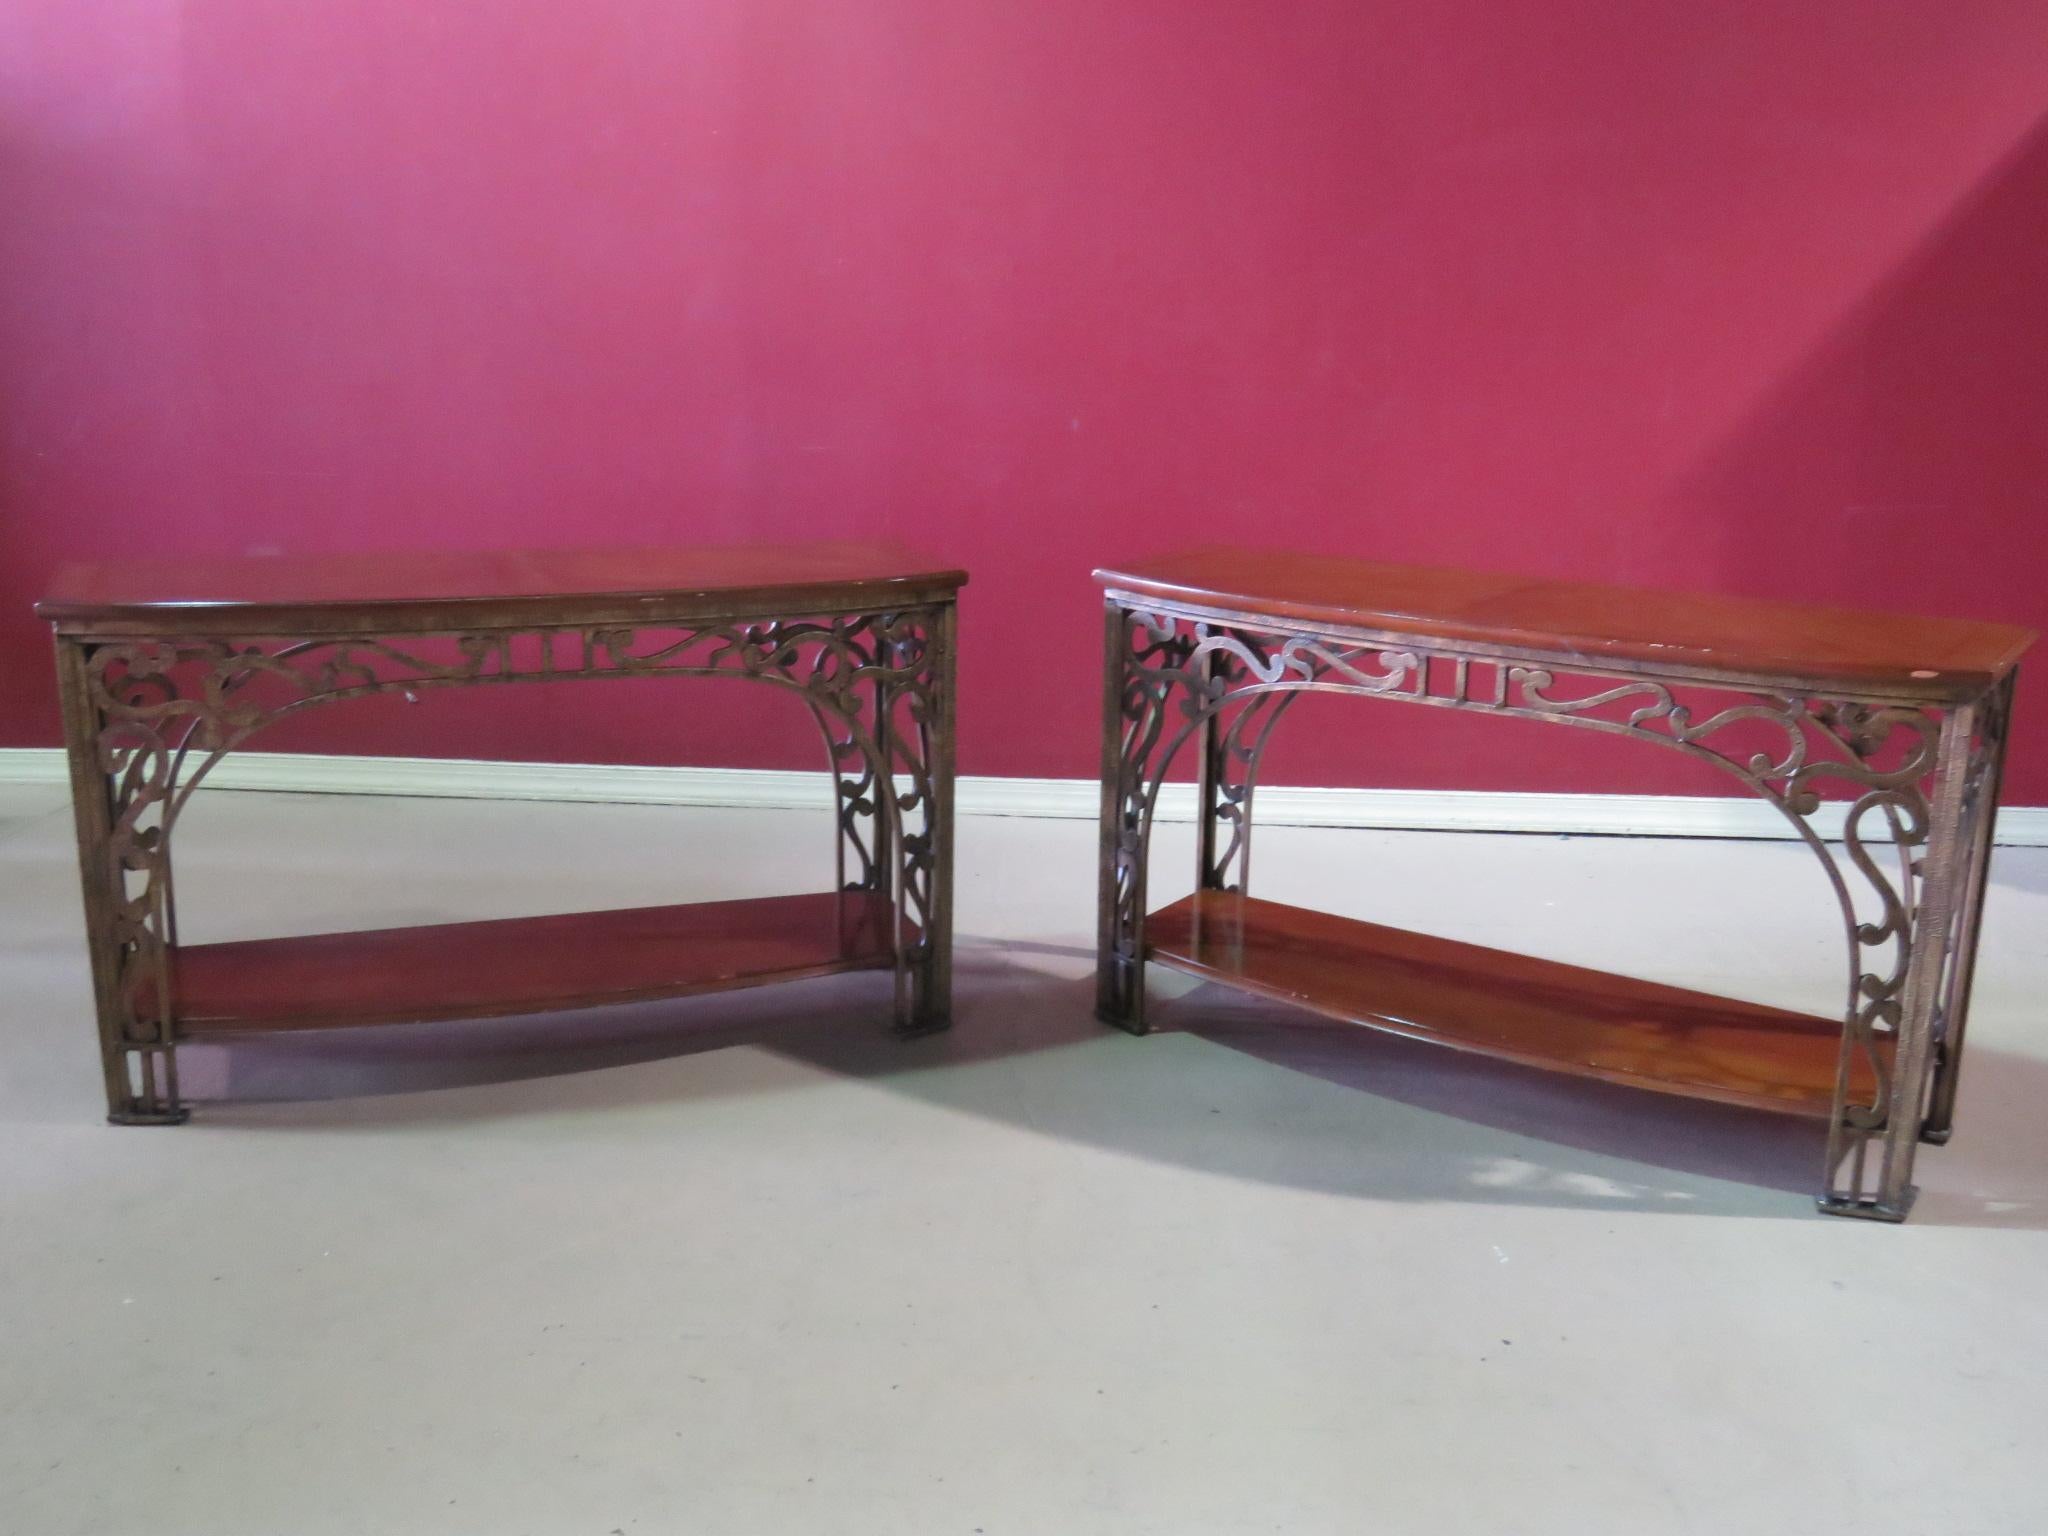 This is a highly ornamental pair of hand-wrought iron console tables with incredible workmanship. They are designed in the style of Louis Majorelle but are not of the period. They are beautifully made and very substantial while remaining visually